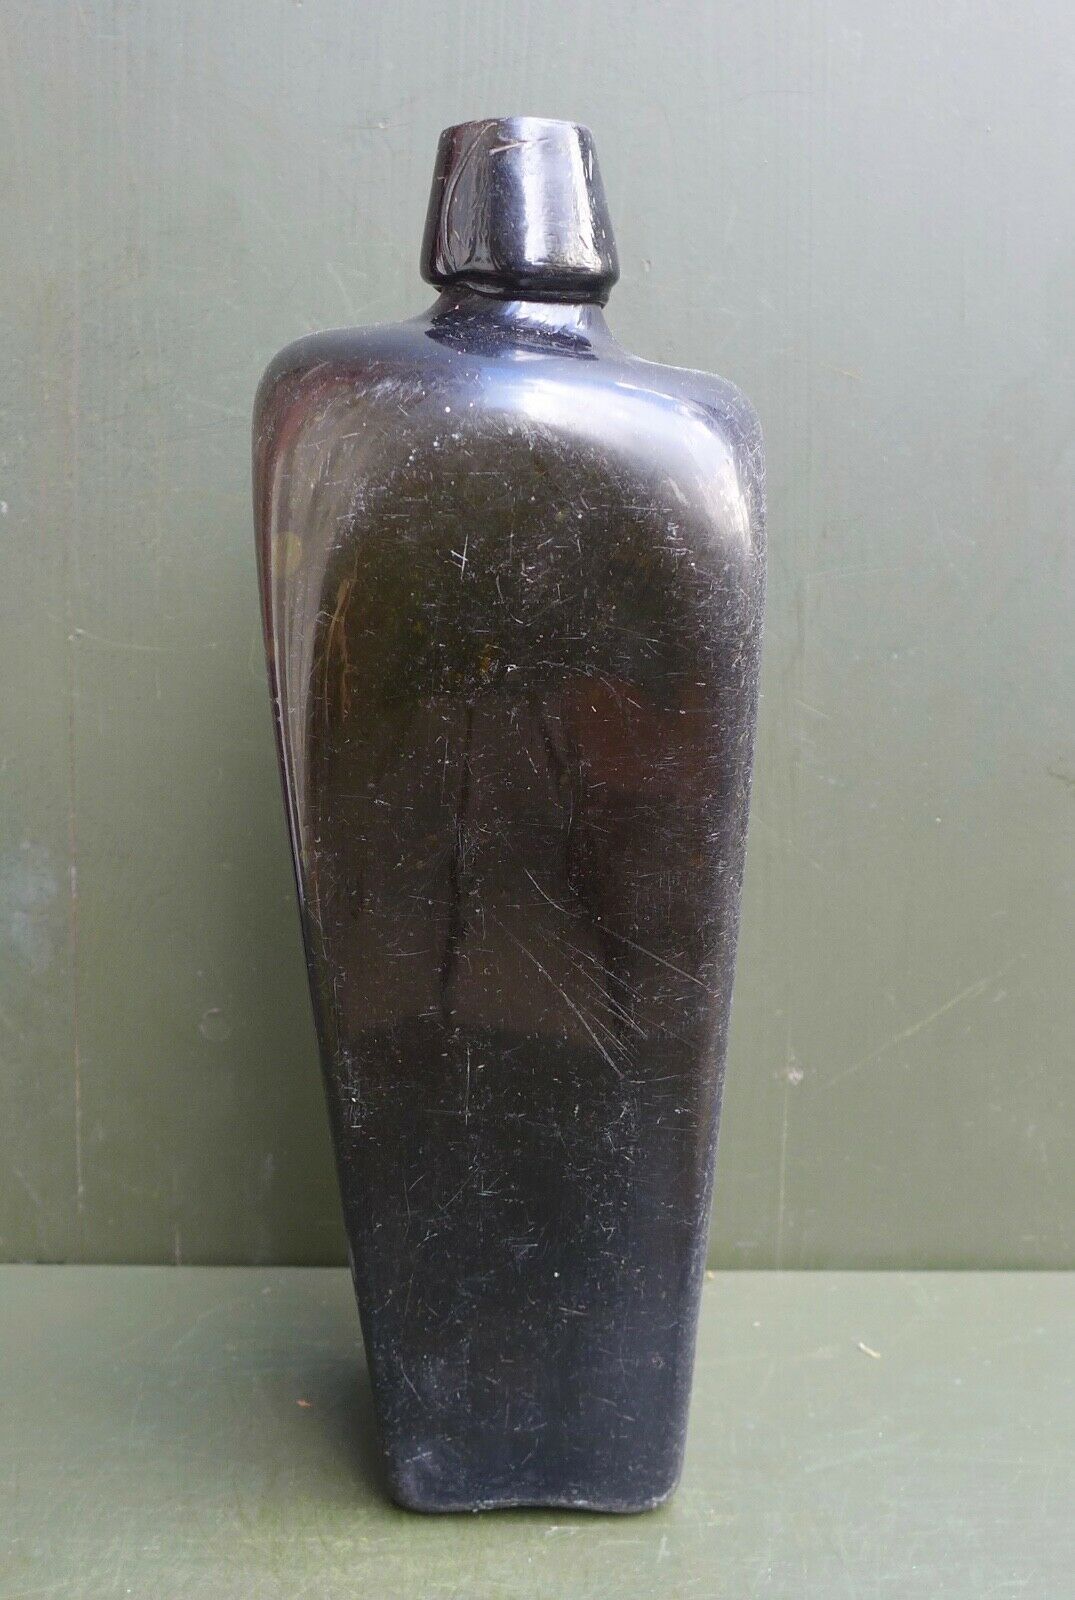 Nice Antique Dark Green Glass Square Gin Bottle Dutch Or English 18th/19th C.